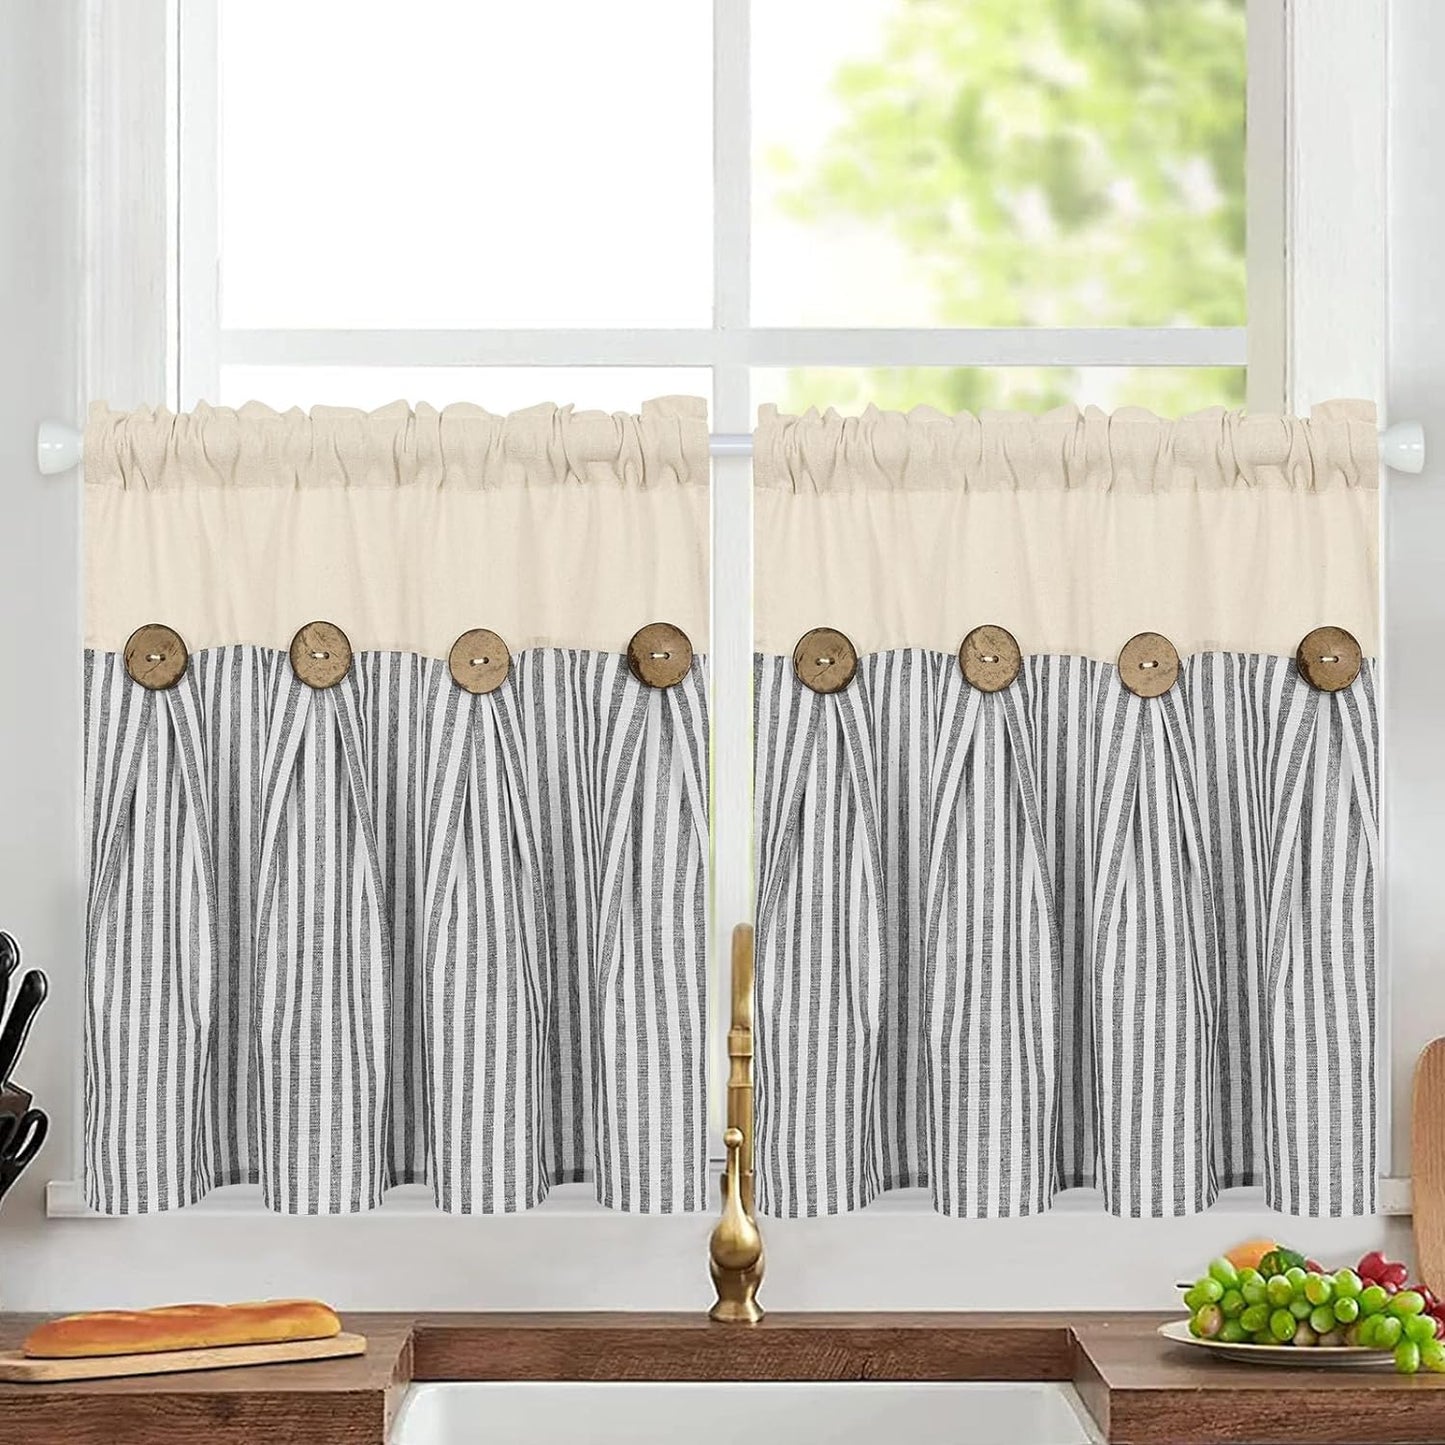 Cotton Linen Farmhouse Curtains Boho Rustic Button Curtains Natural and Dark Grey Stripe Color Block Curtain Rod Pocket & Back Tab Window Drapes for Bedroom Living Room(52 X 84 Inch, 2 Panels)  BLEUM CADE Dark Grey Stripe W26 X L24 